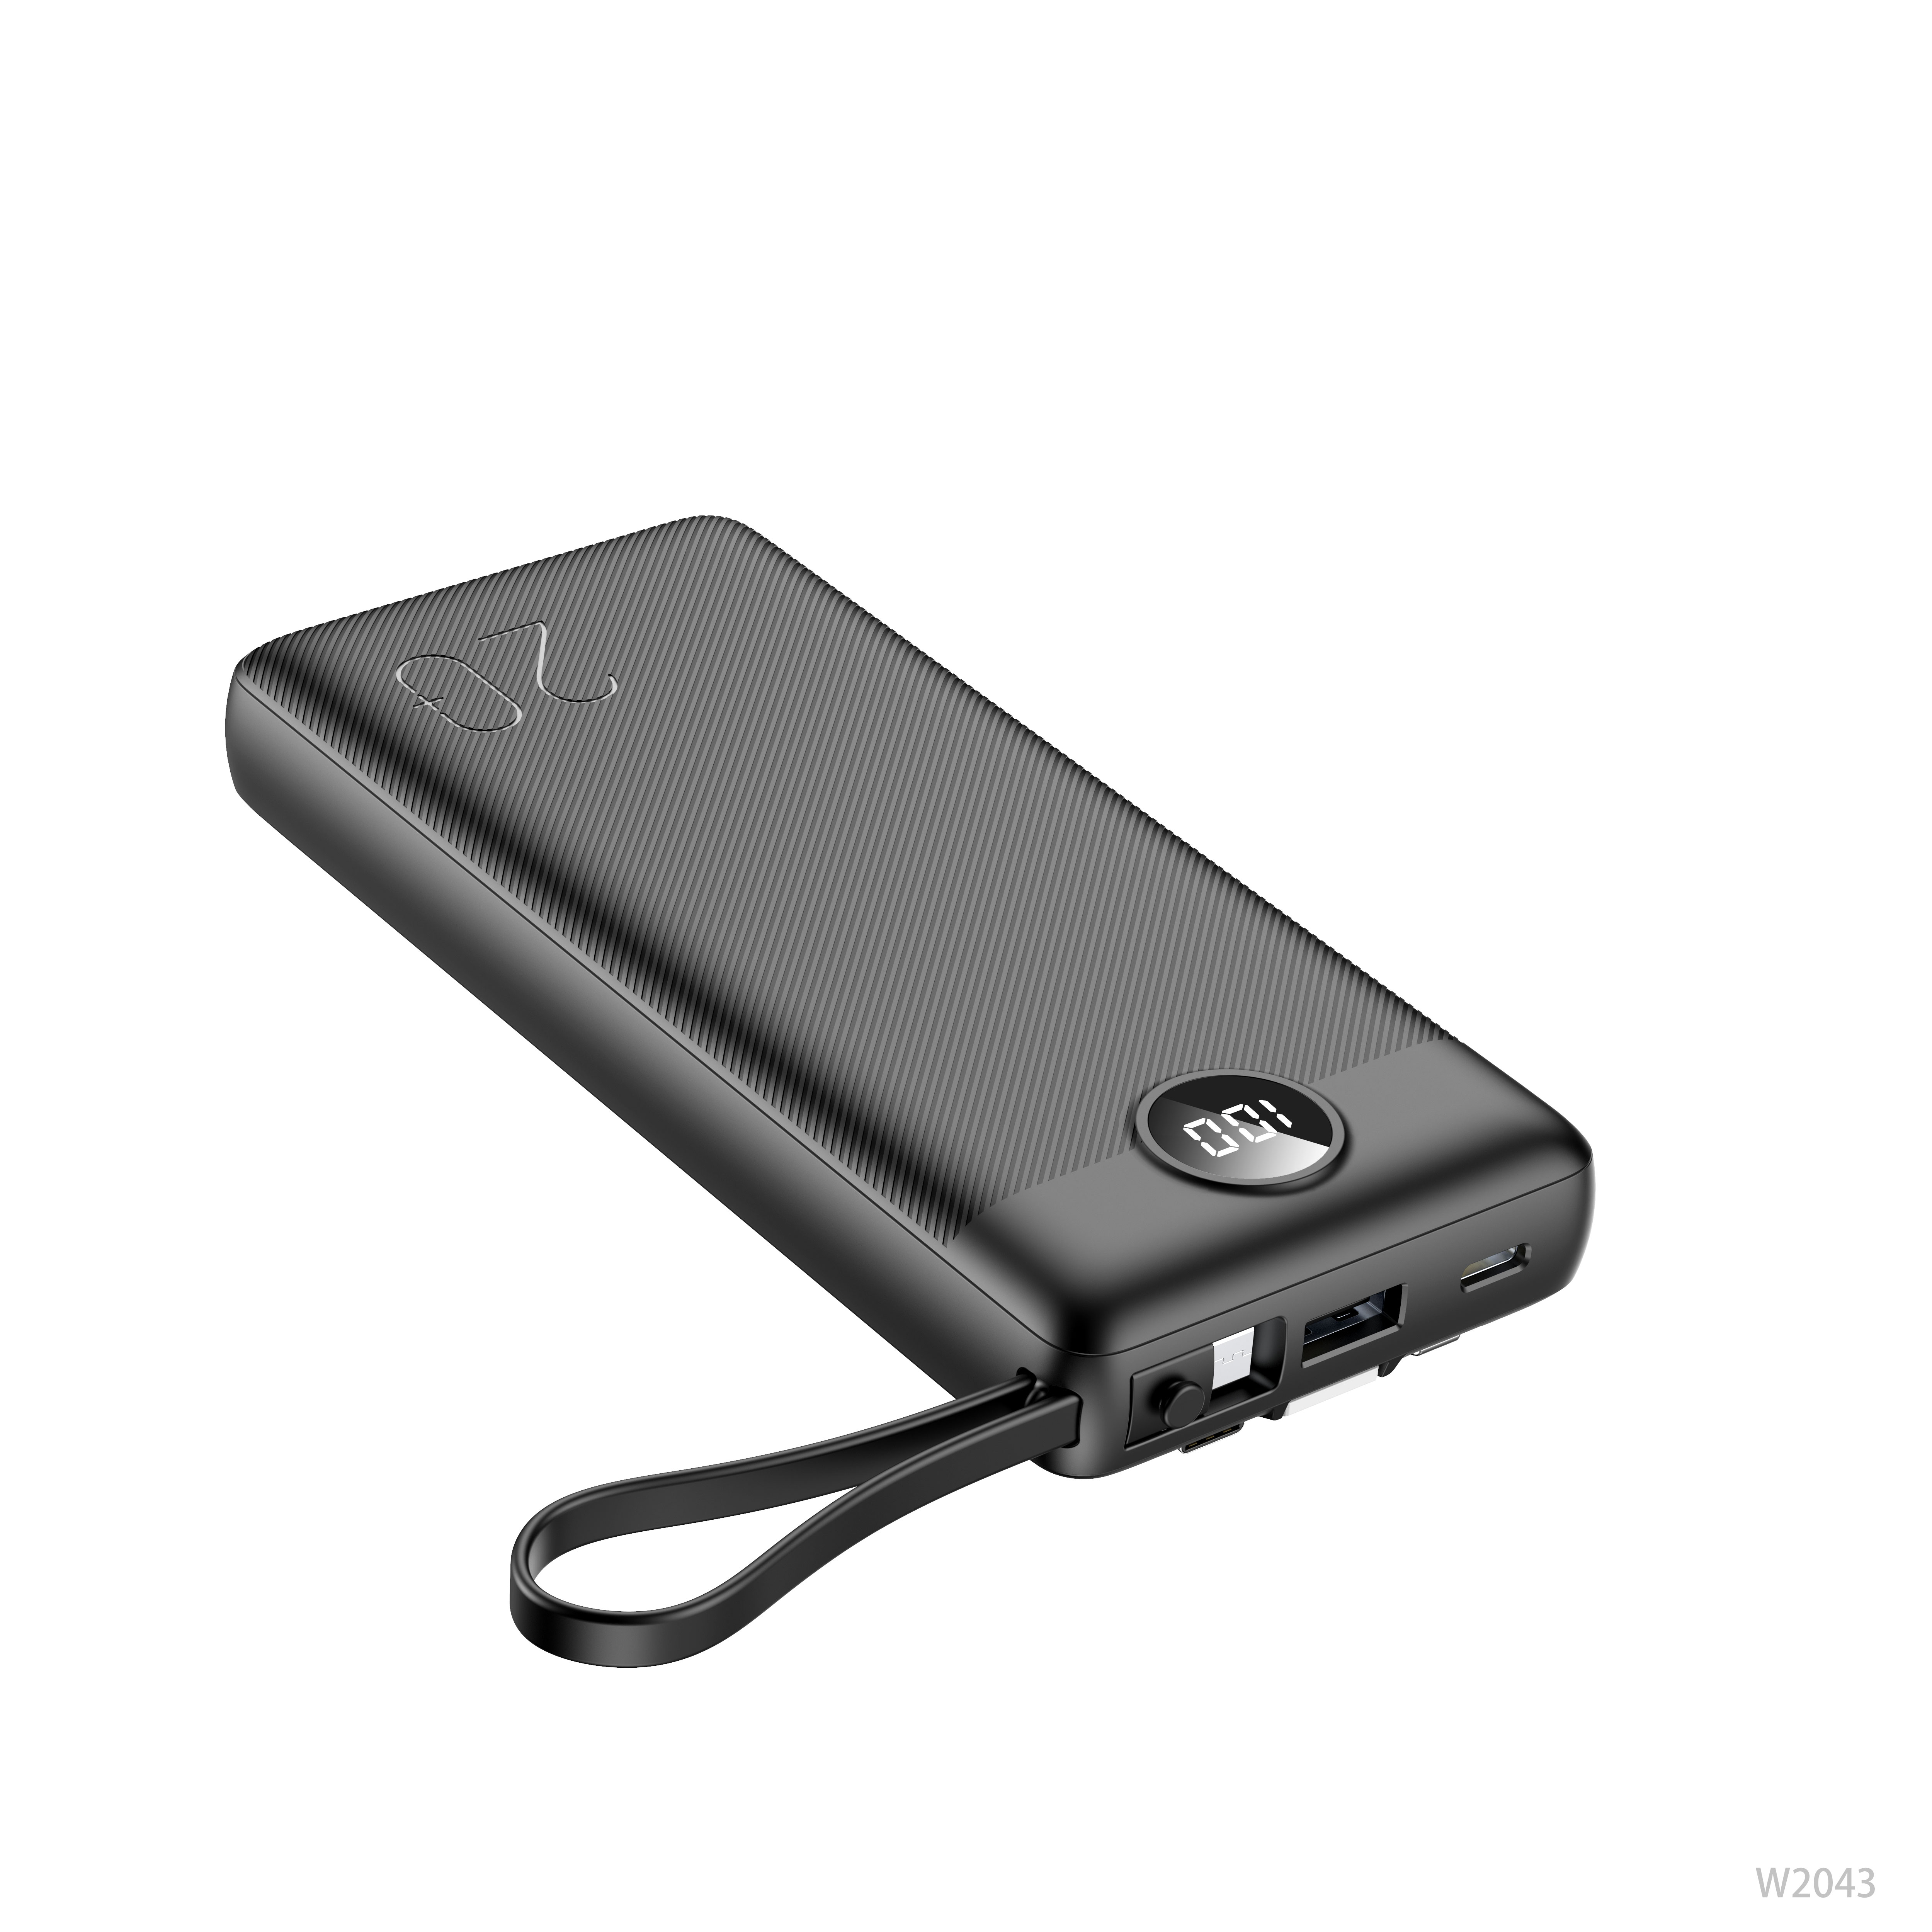 Power Bank Veger C20, 20000mAh, Display LED, Fast-Charge,